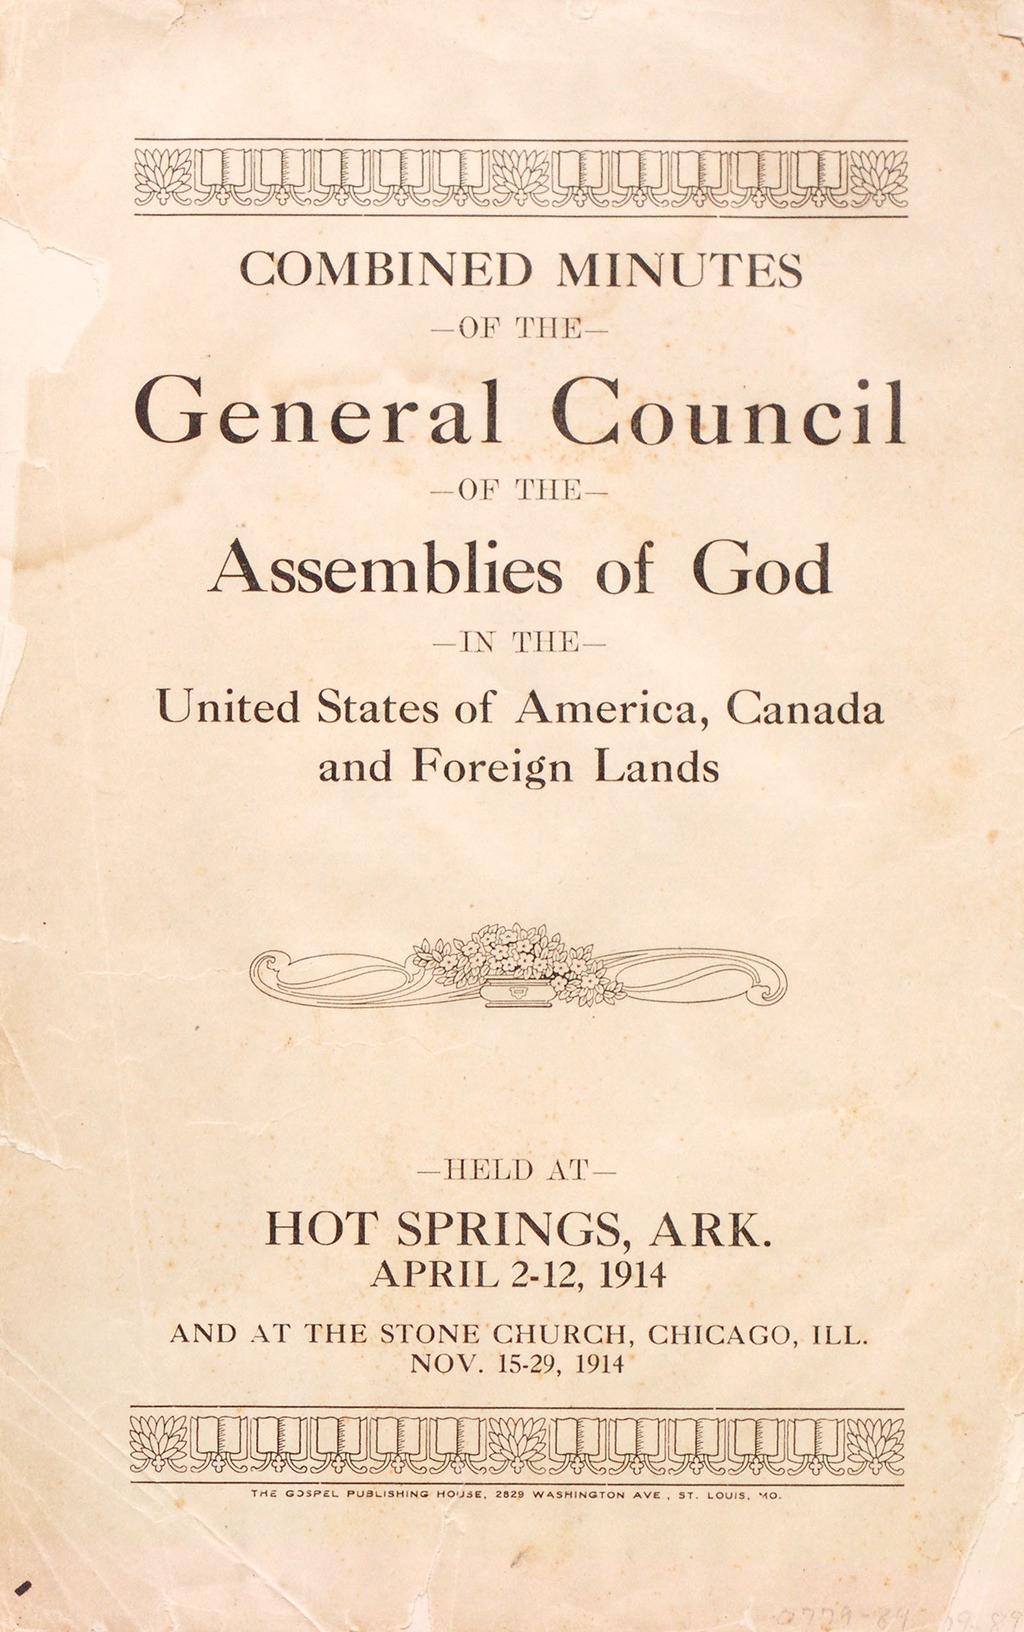 COMBINED MINUTES - 0 F' ']' I IE- General Council - OF 'lill;;- Assem blies of God - lx r lle - United States of America, Canada and Foreign Lands - H ELD '\ '}' - HOT